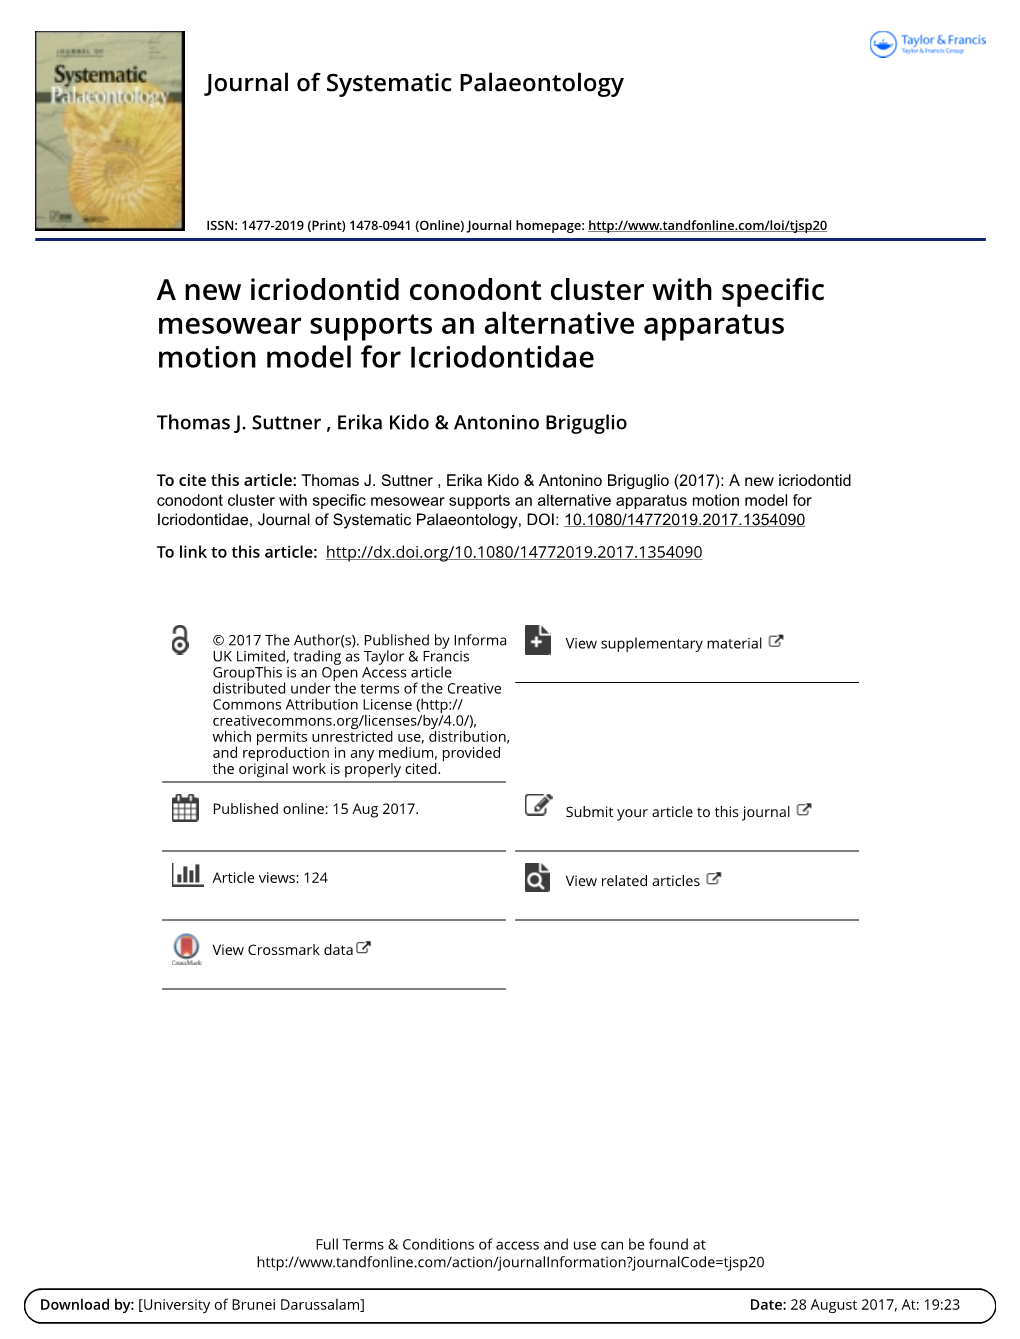 A New Icriodontid Conodont Cluster with Specific Mesowear Supports an Alternative Apparatus Motion Model for Icriodontidae